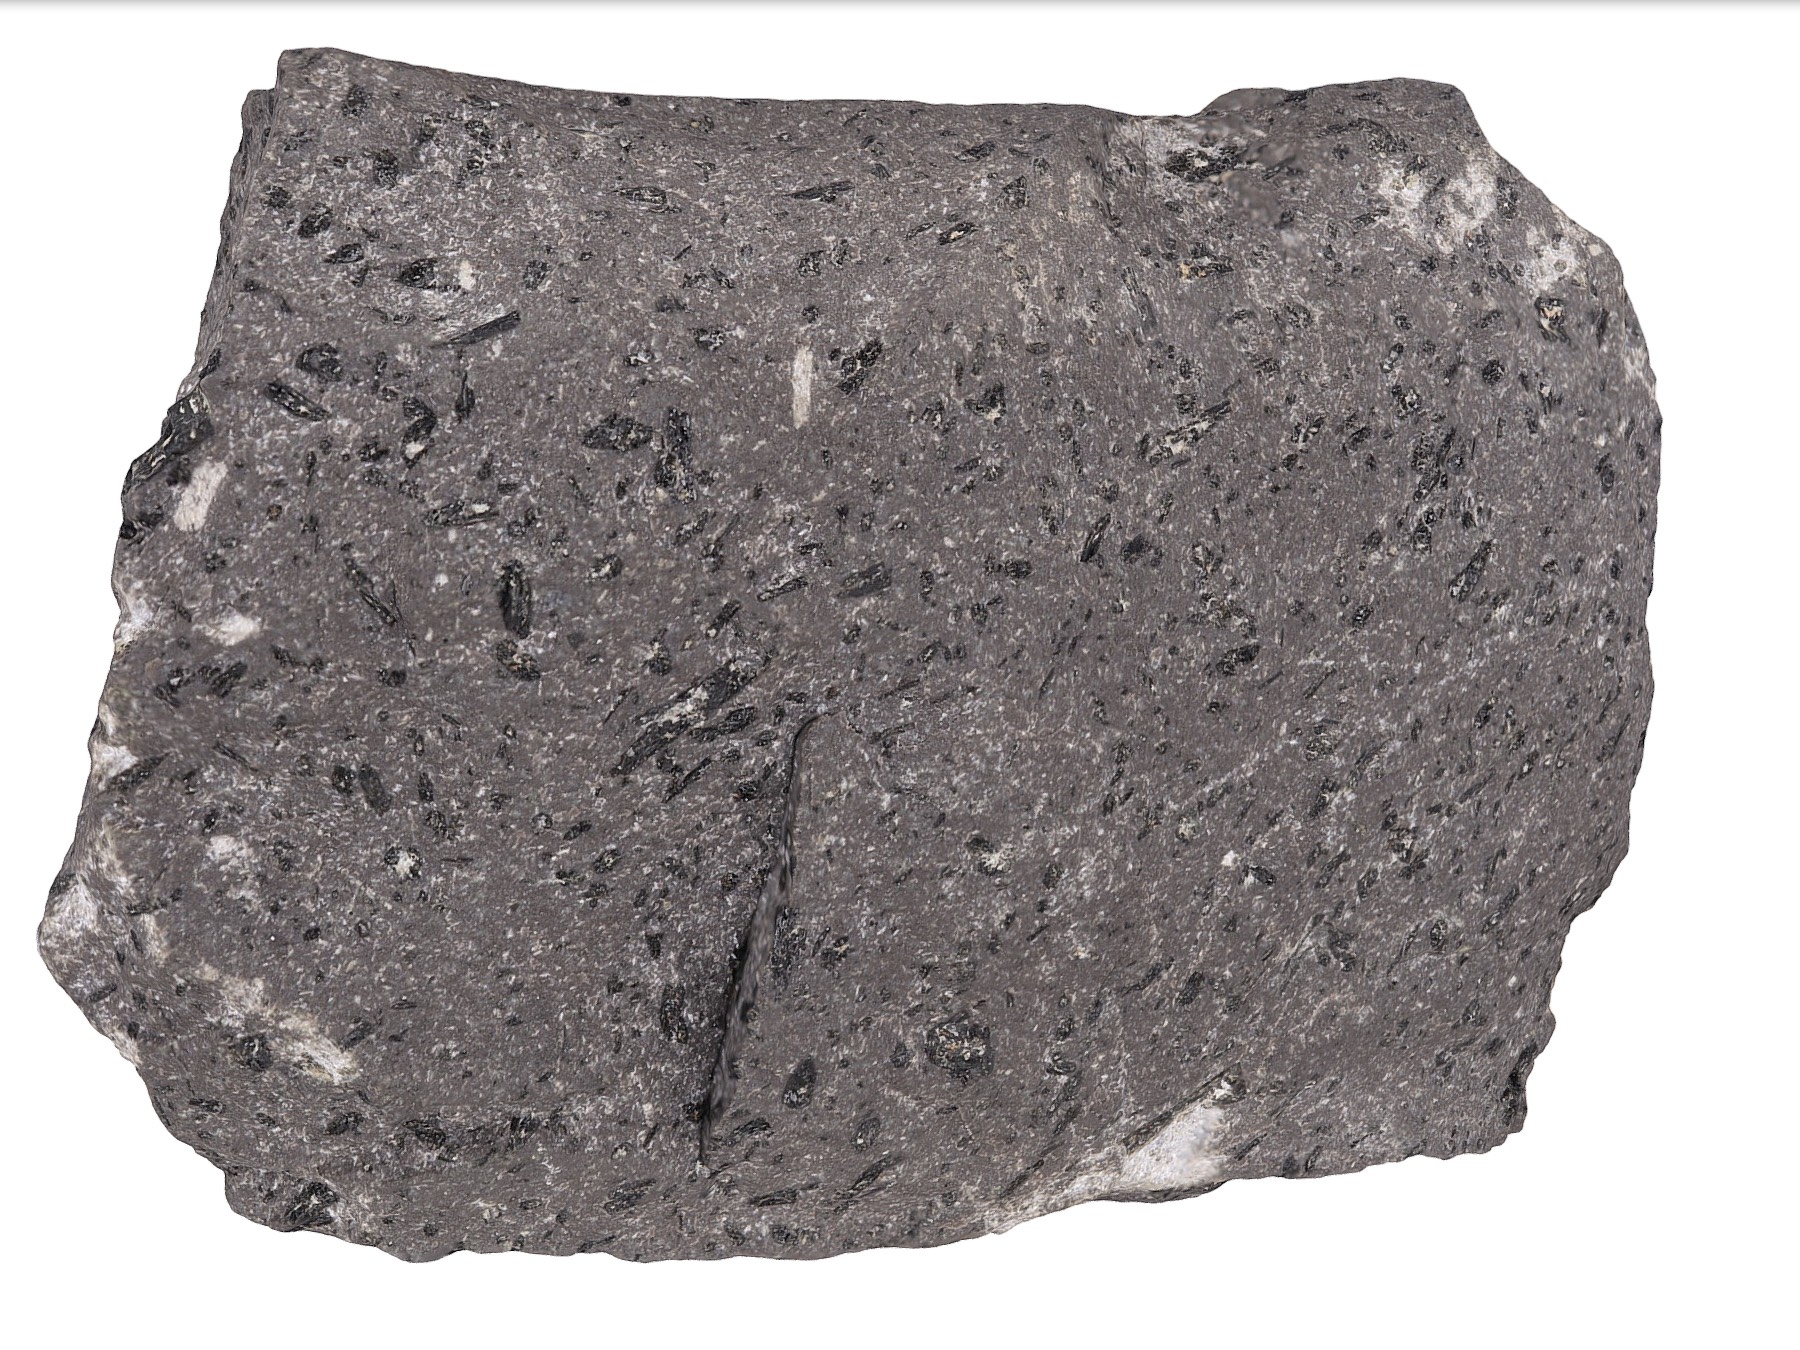 Andesite Hand Sample